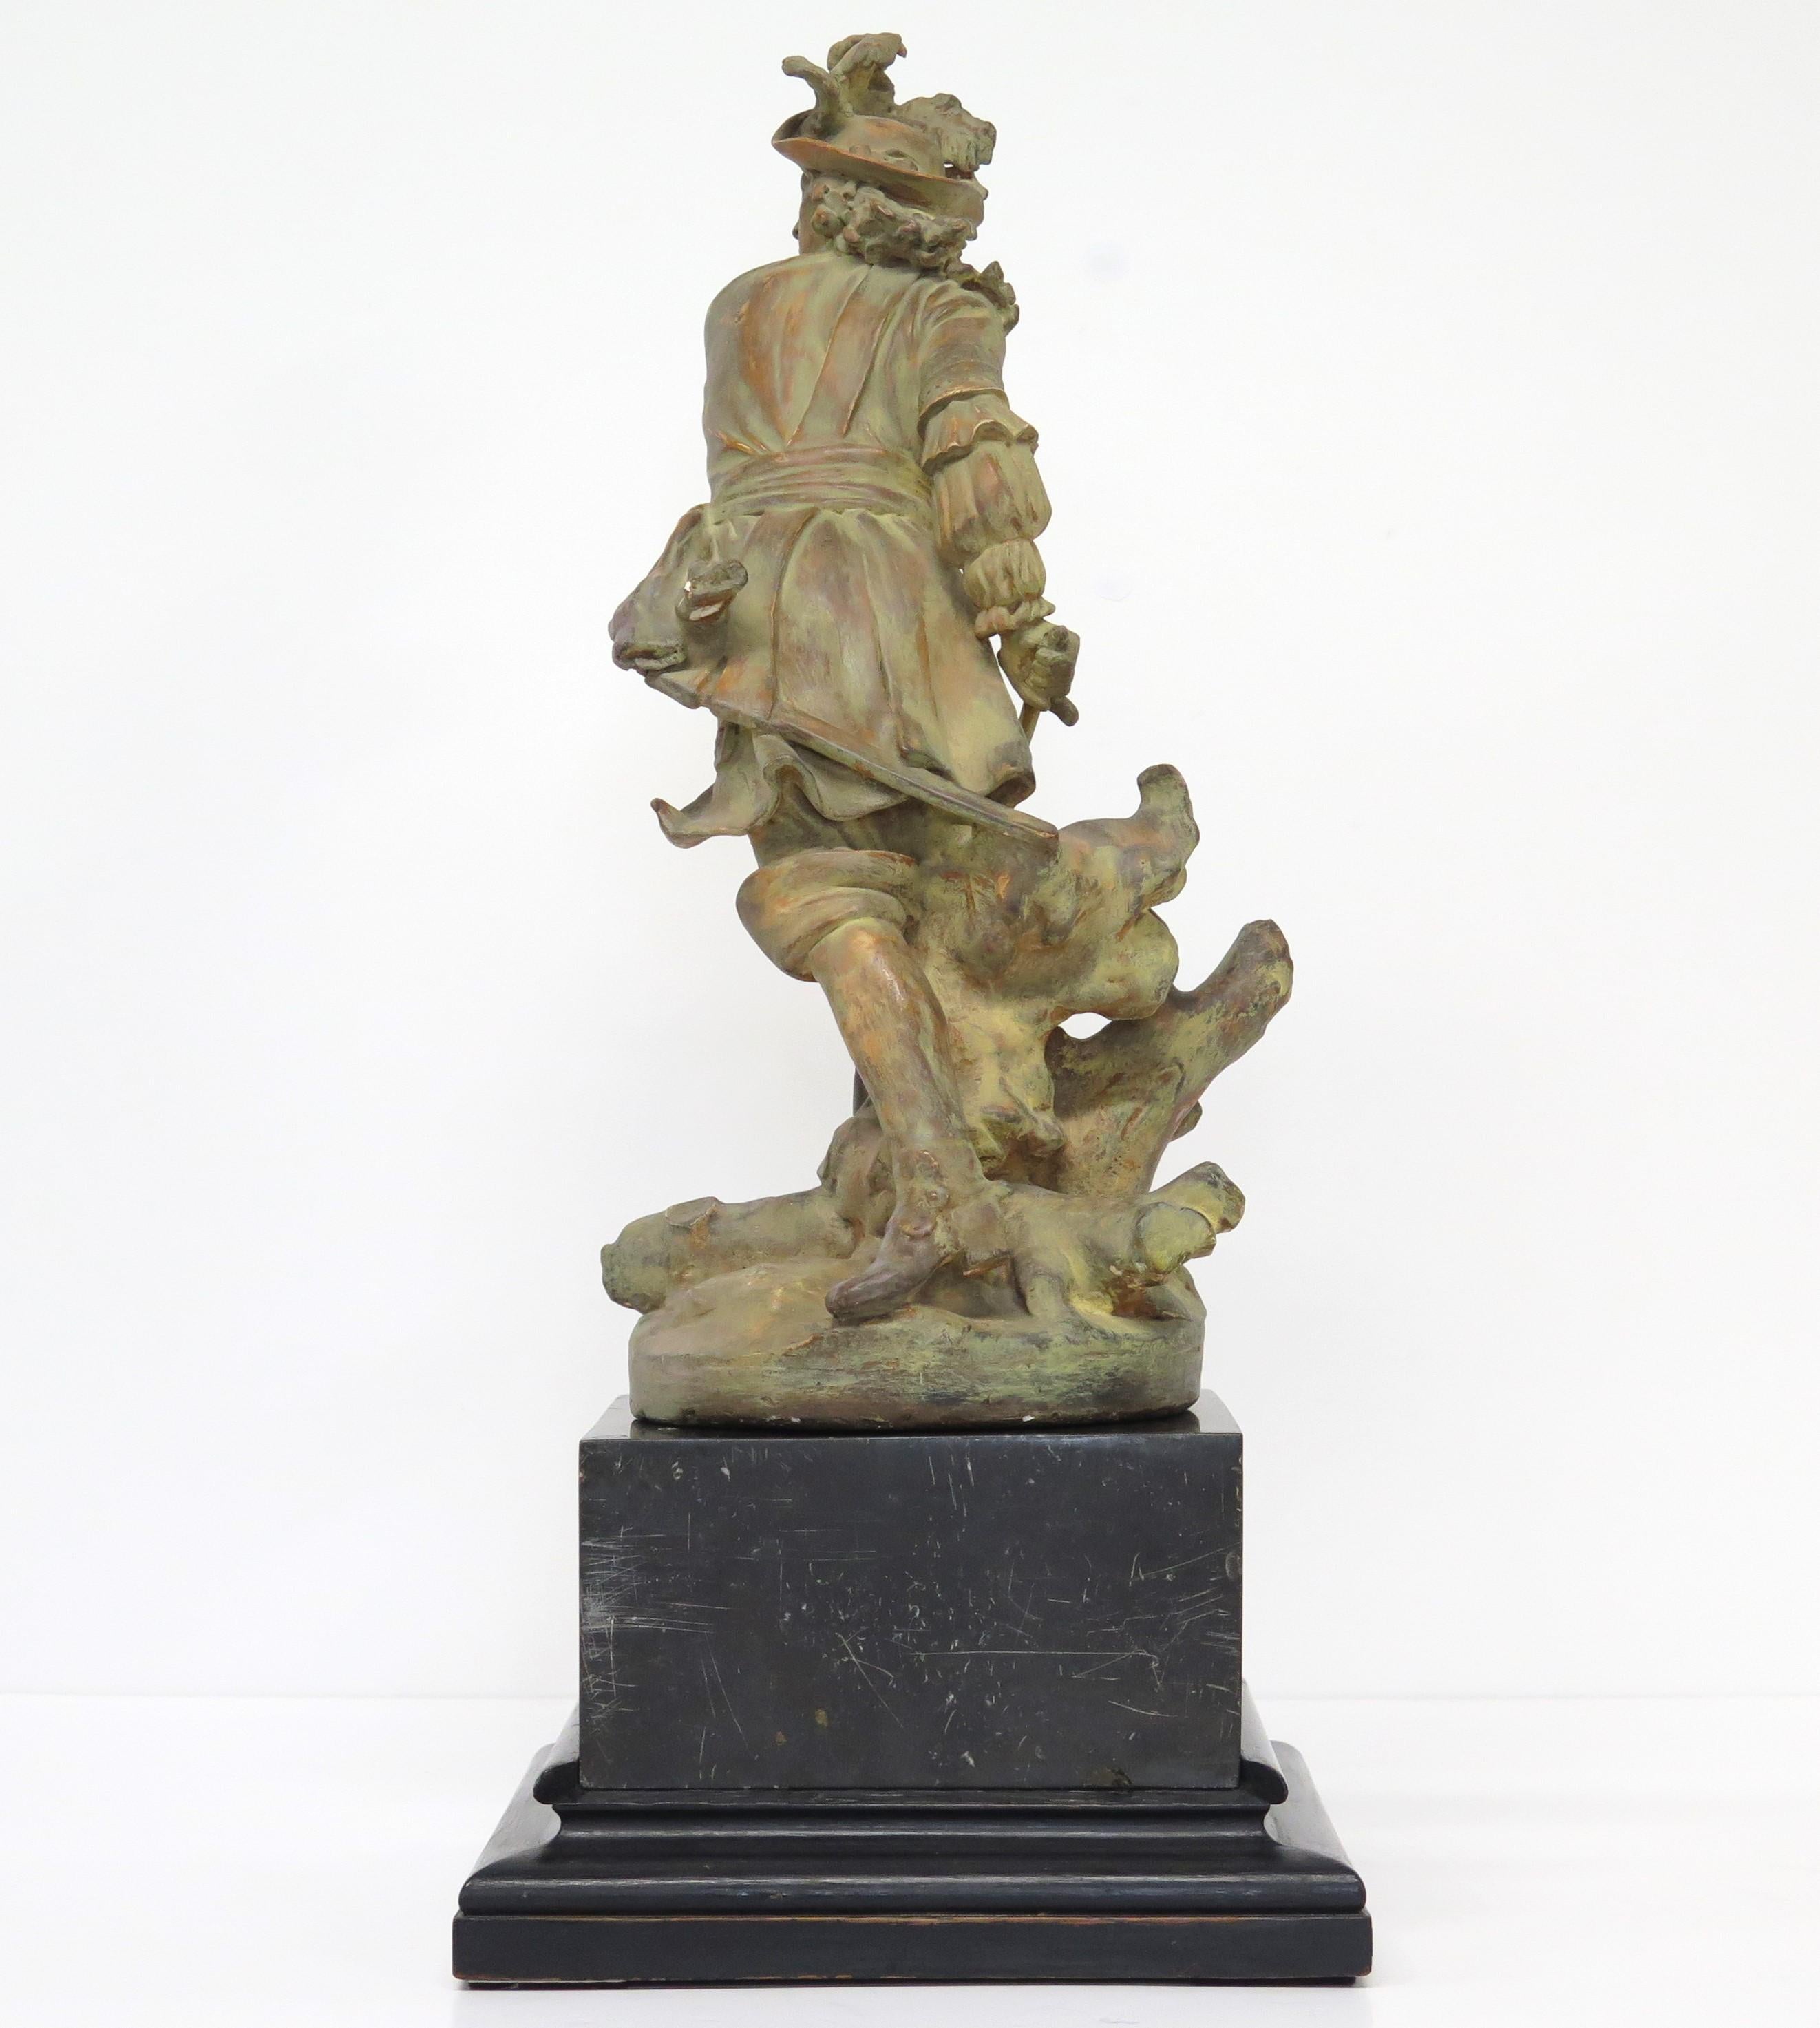 Neoclassical Terra Cotta Figure After the Bronze by Pierre-Jean David d'Angers 1788 For Sale